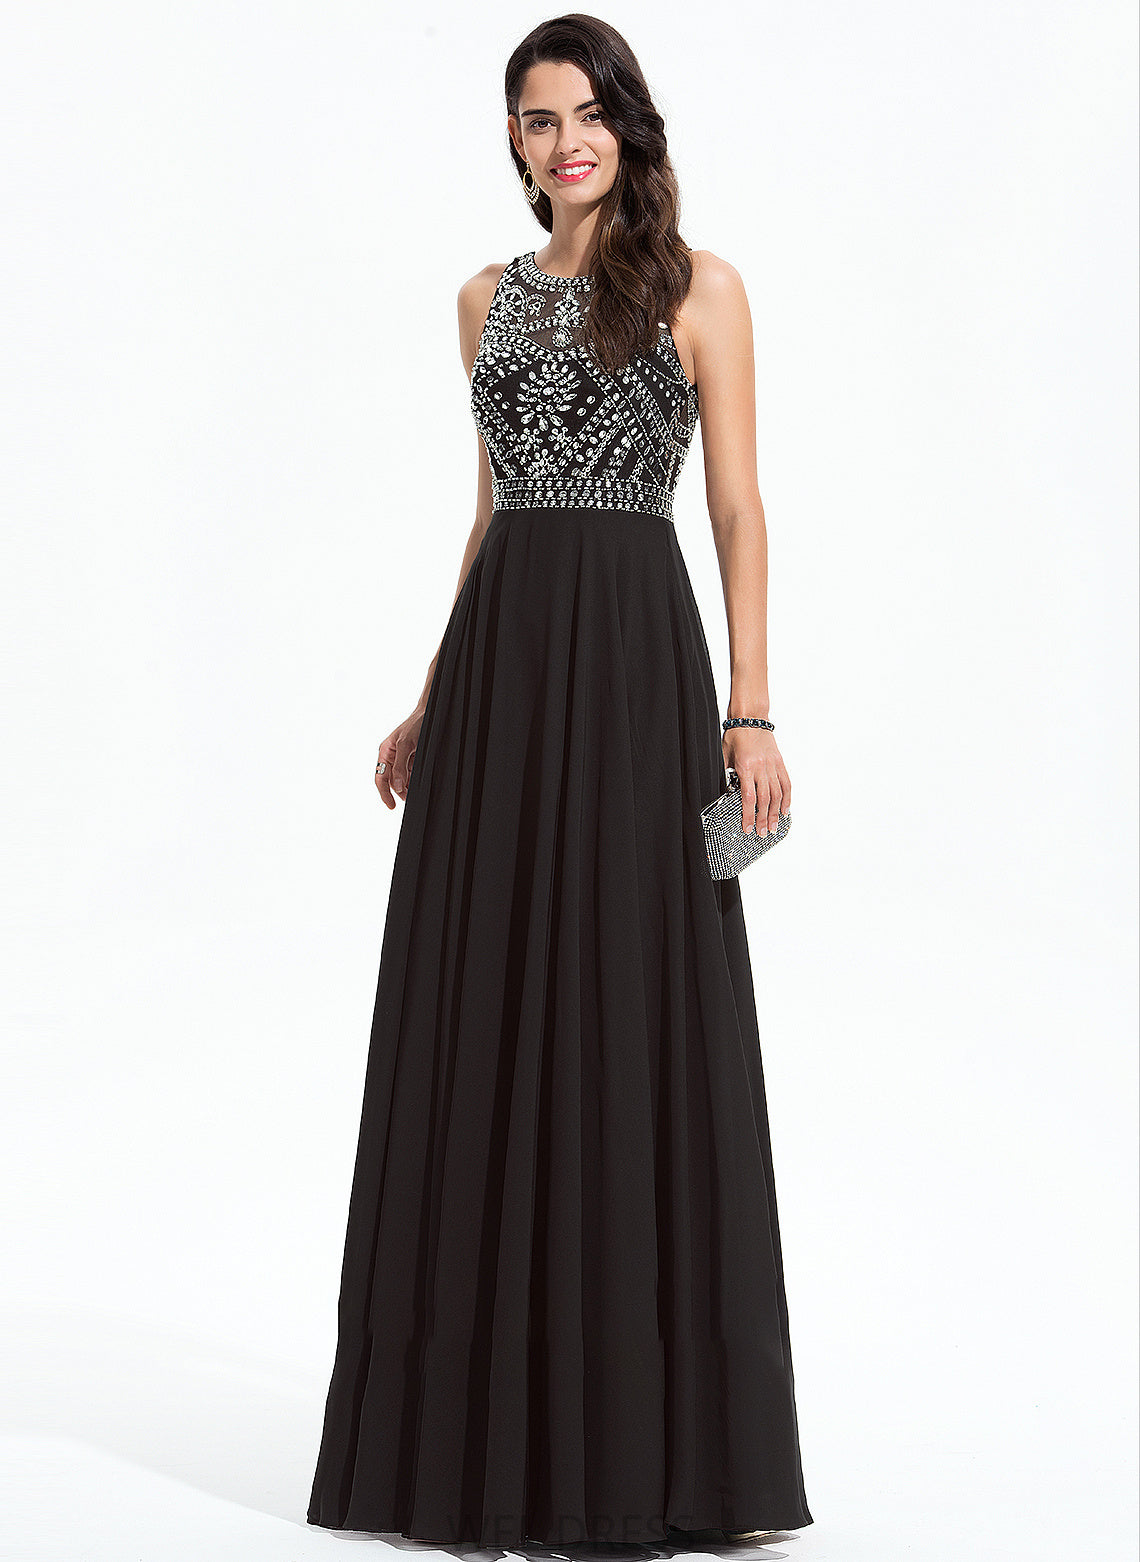 Prom Dresses Neck Scoop Chiffon Beading With A-Line Lilyana Floor-Length Sequins